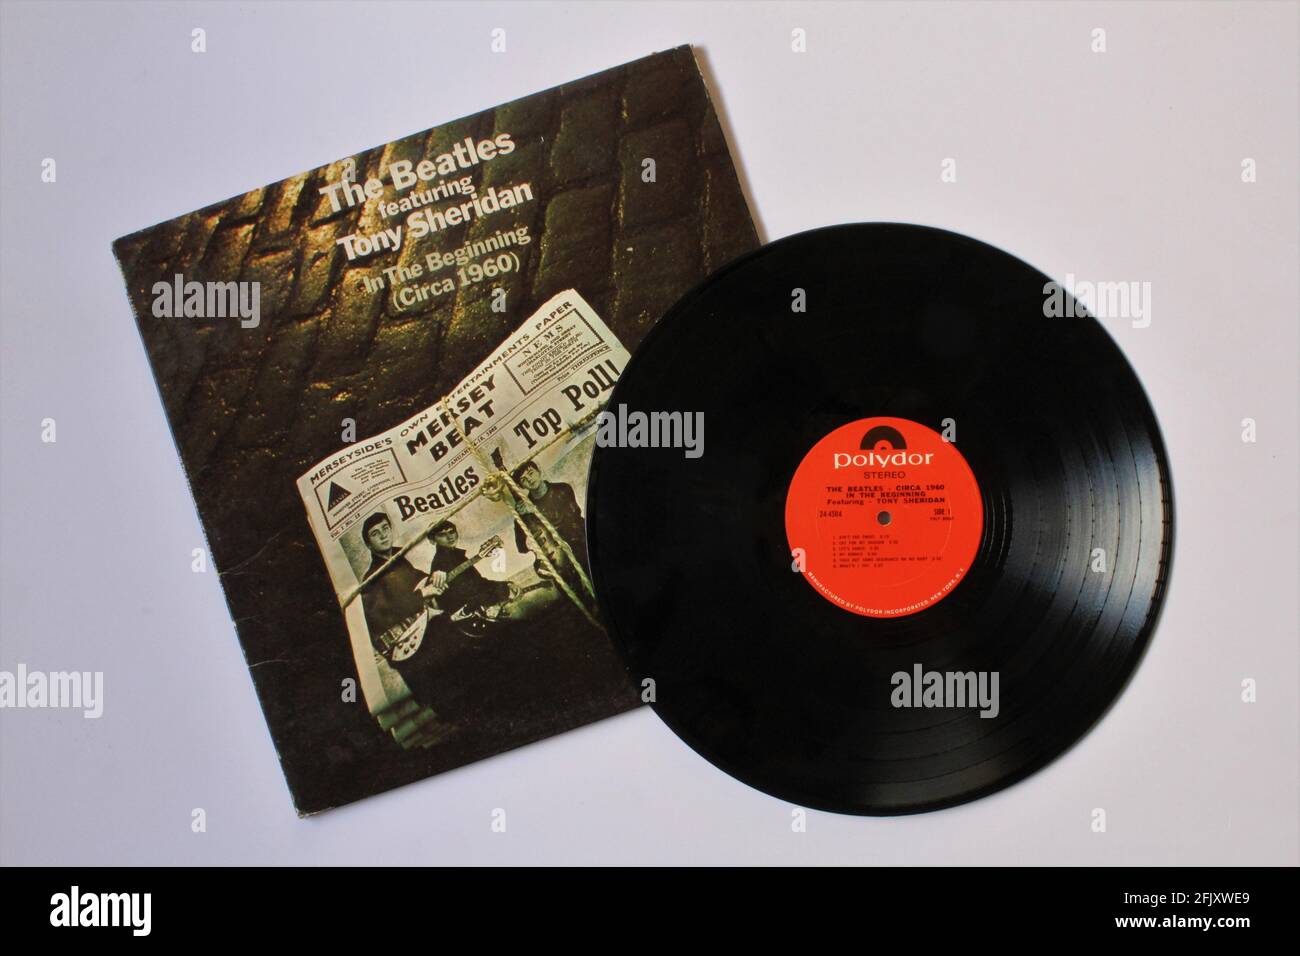 Rock and roll artist, The Beatles featuring Tony Sheridan music album on  vinyl record LP disc. Titled: In the Beginning Circa 1960 Stock Photo -  Alamy